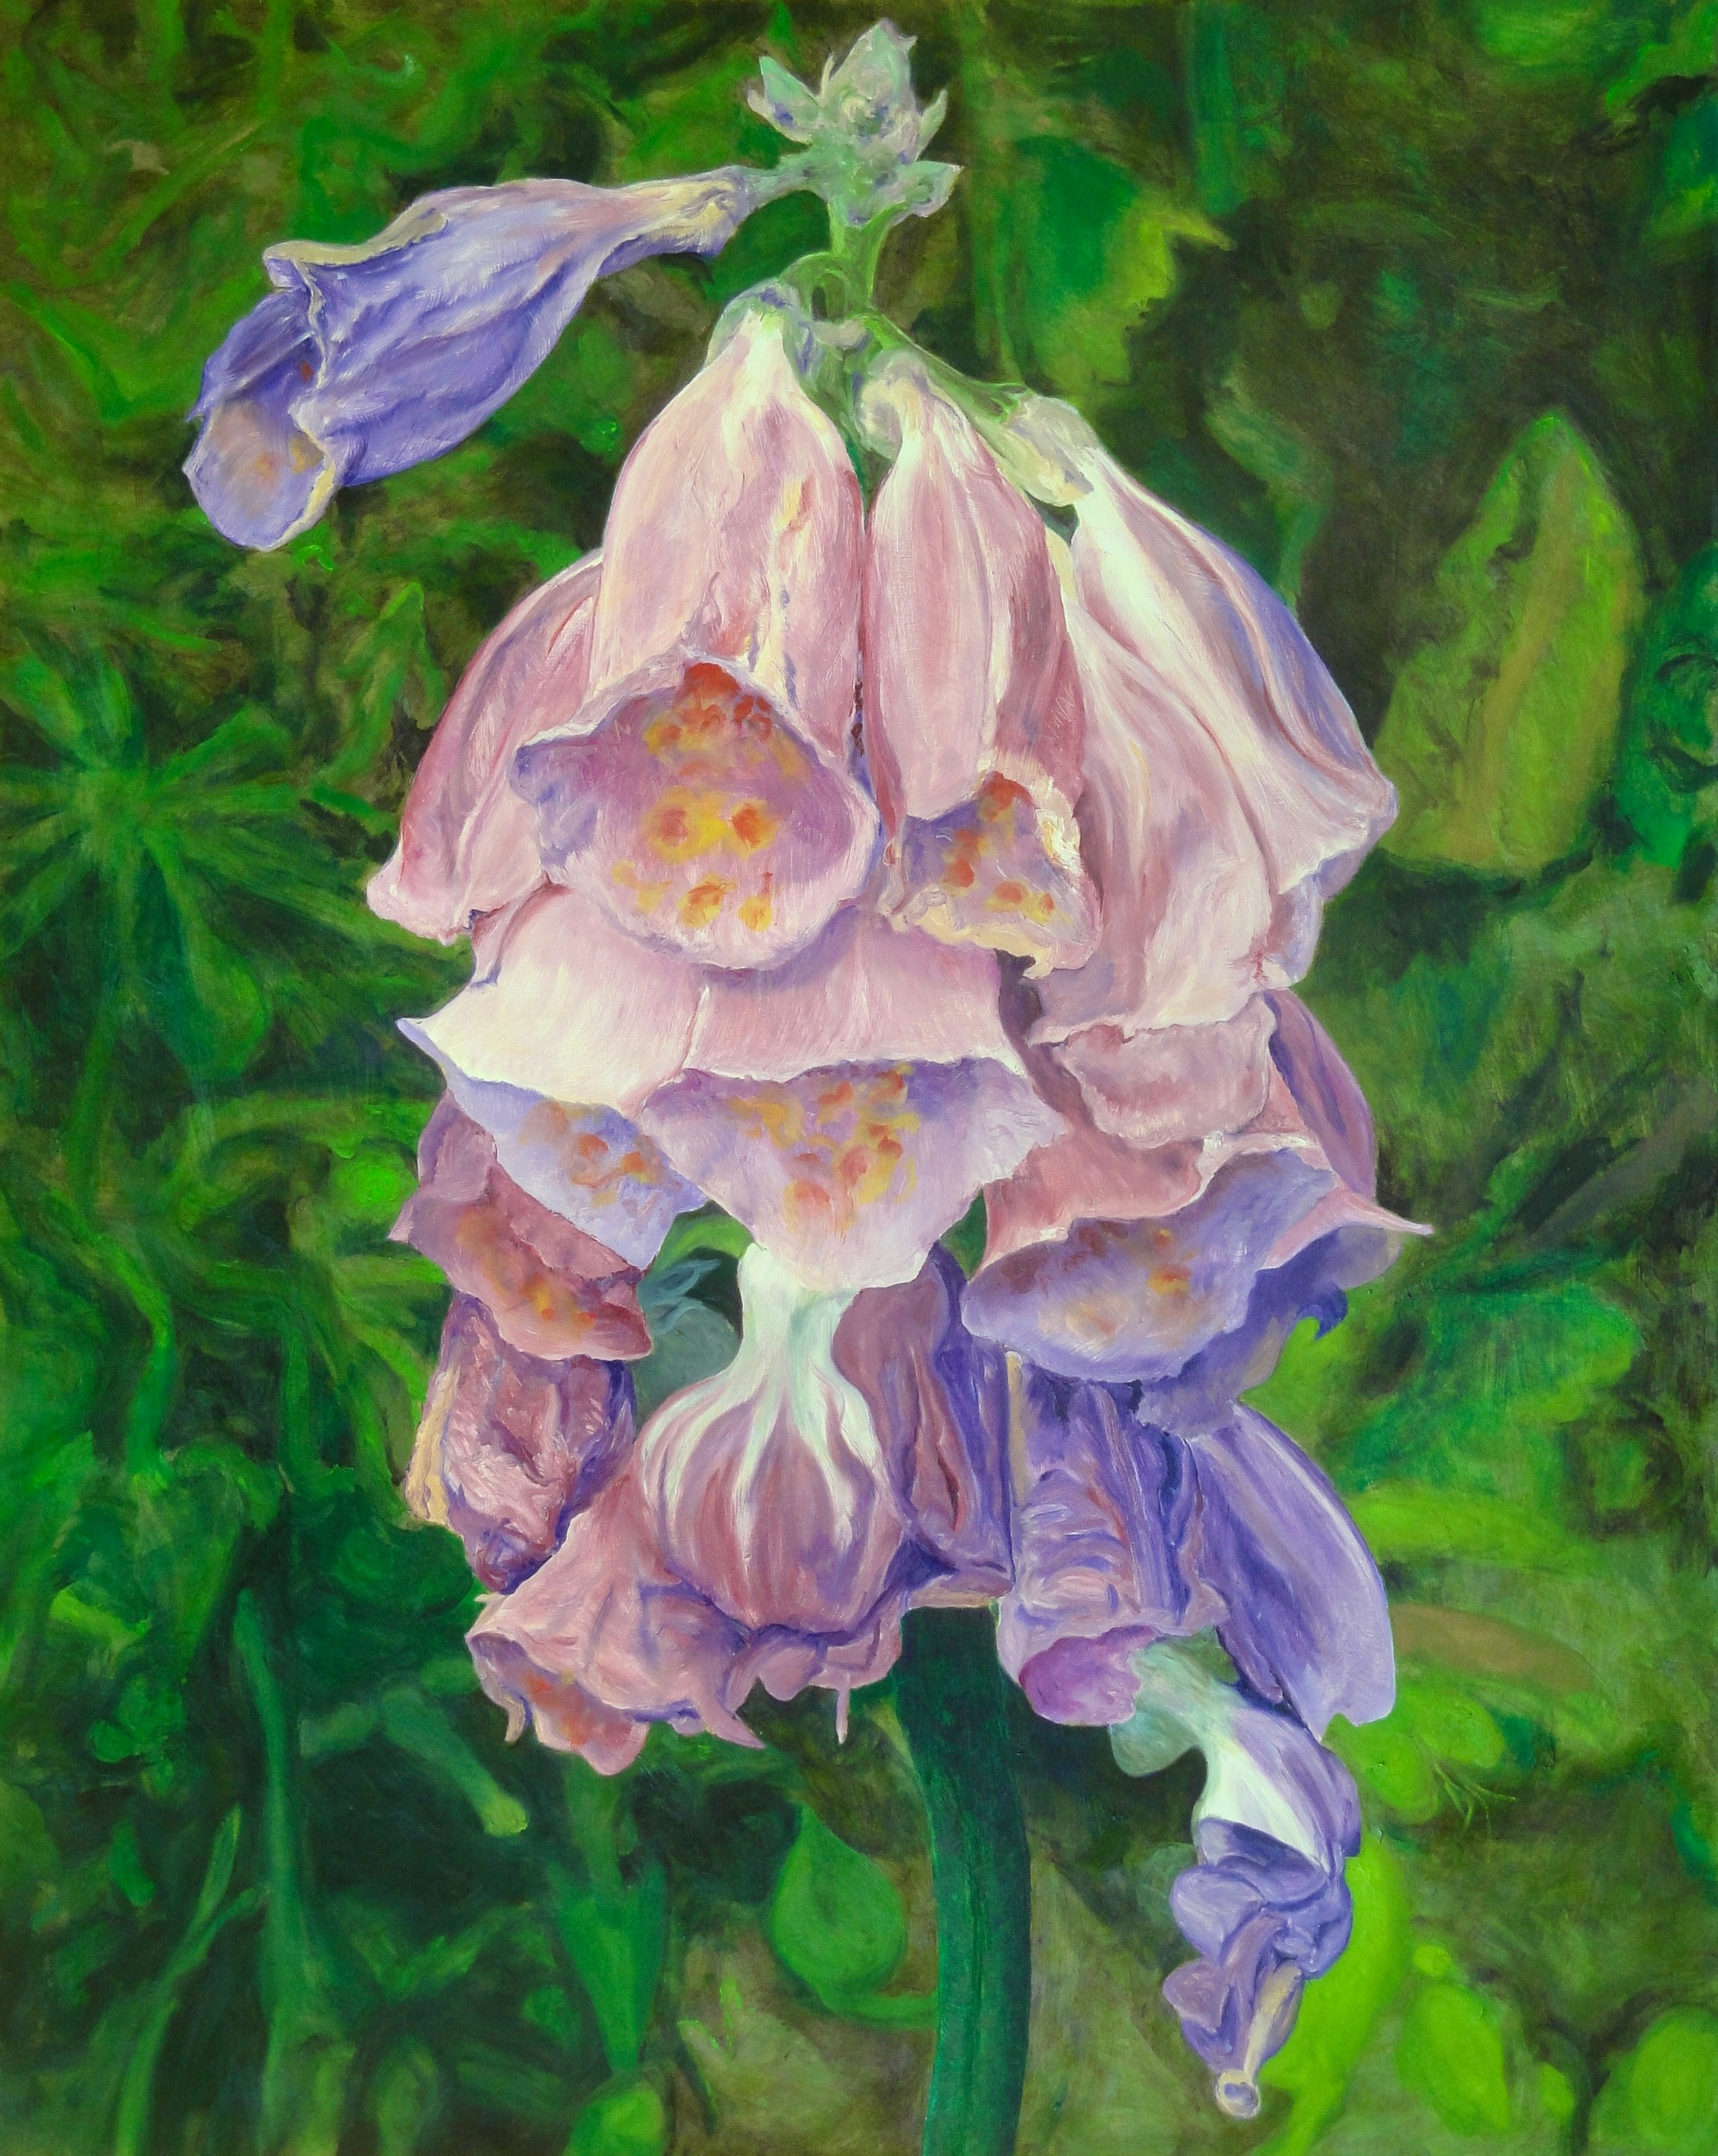 Donald Shambroom's painting from the Collection called Blossom depicting a Foxglove